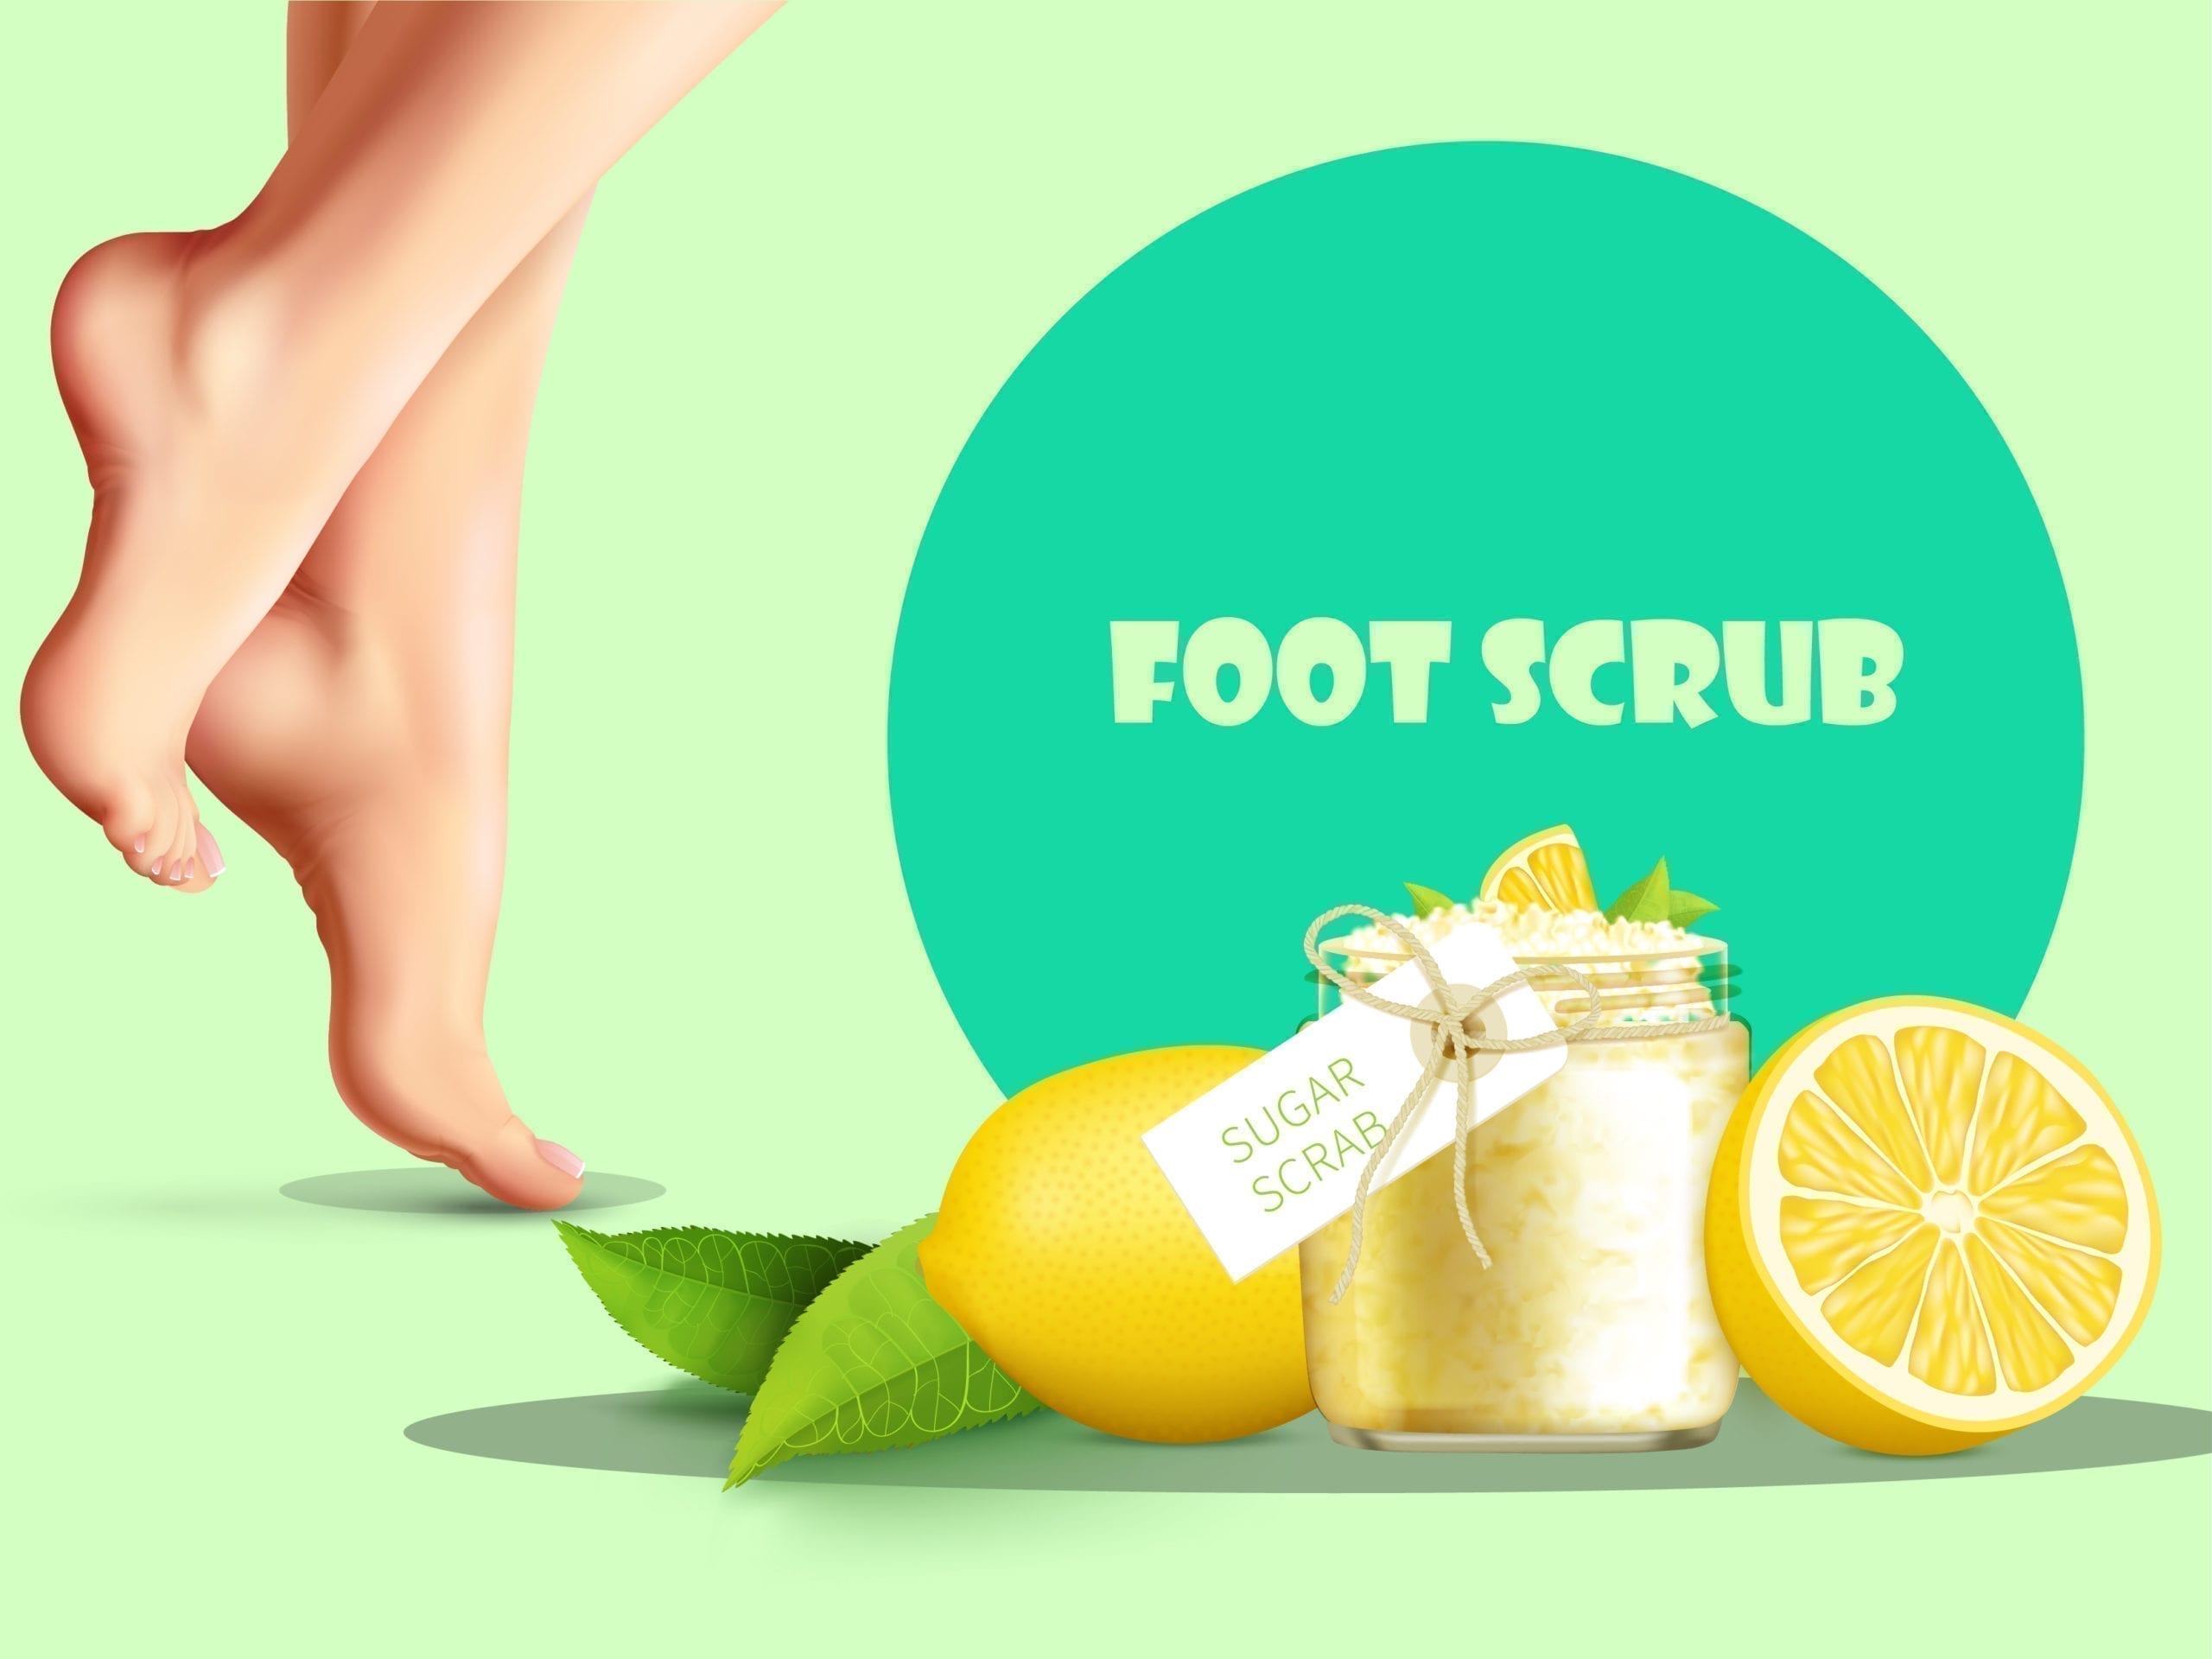 10 Foot Scrub Recipes To Pamper Your Feet